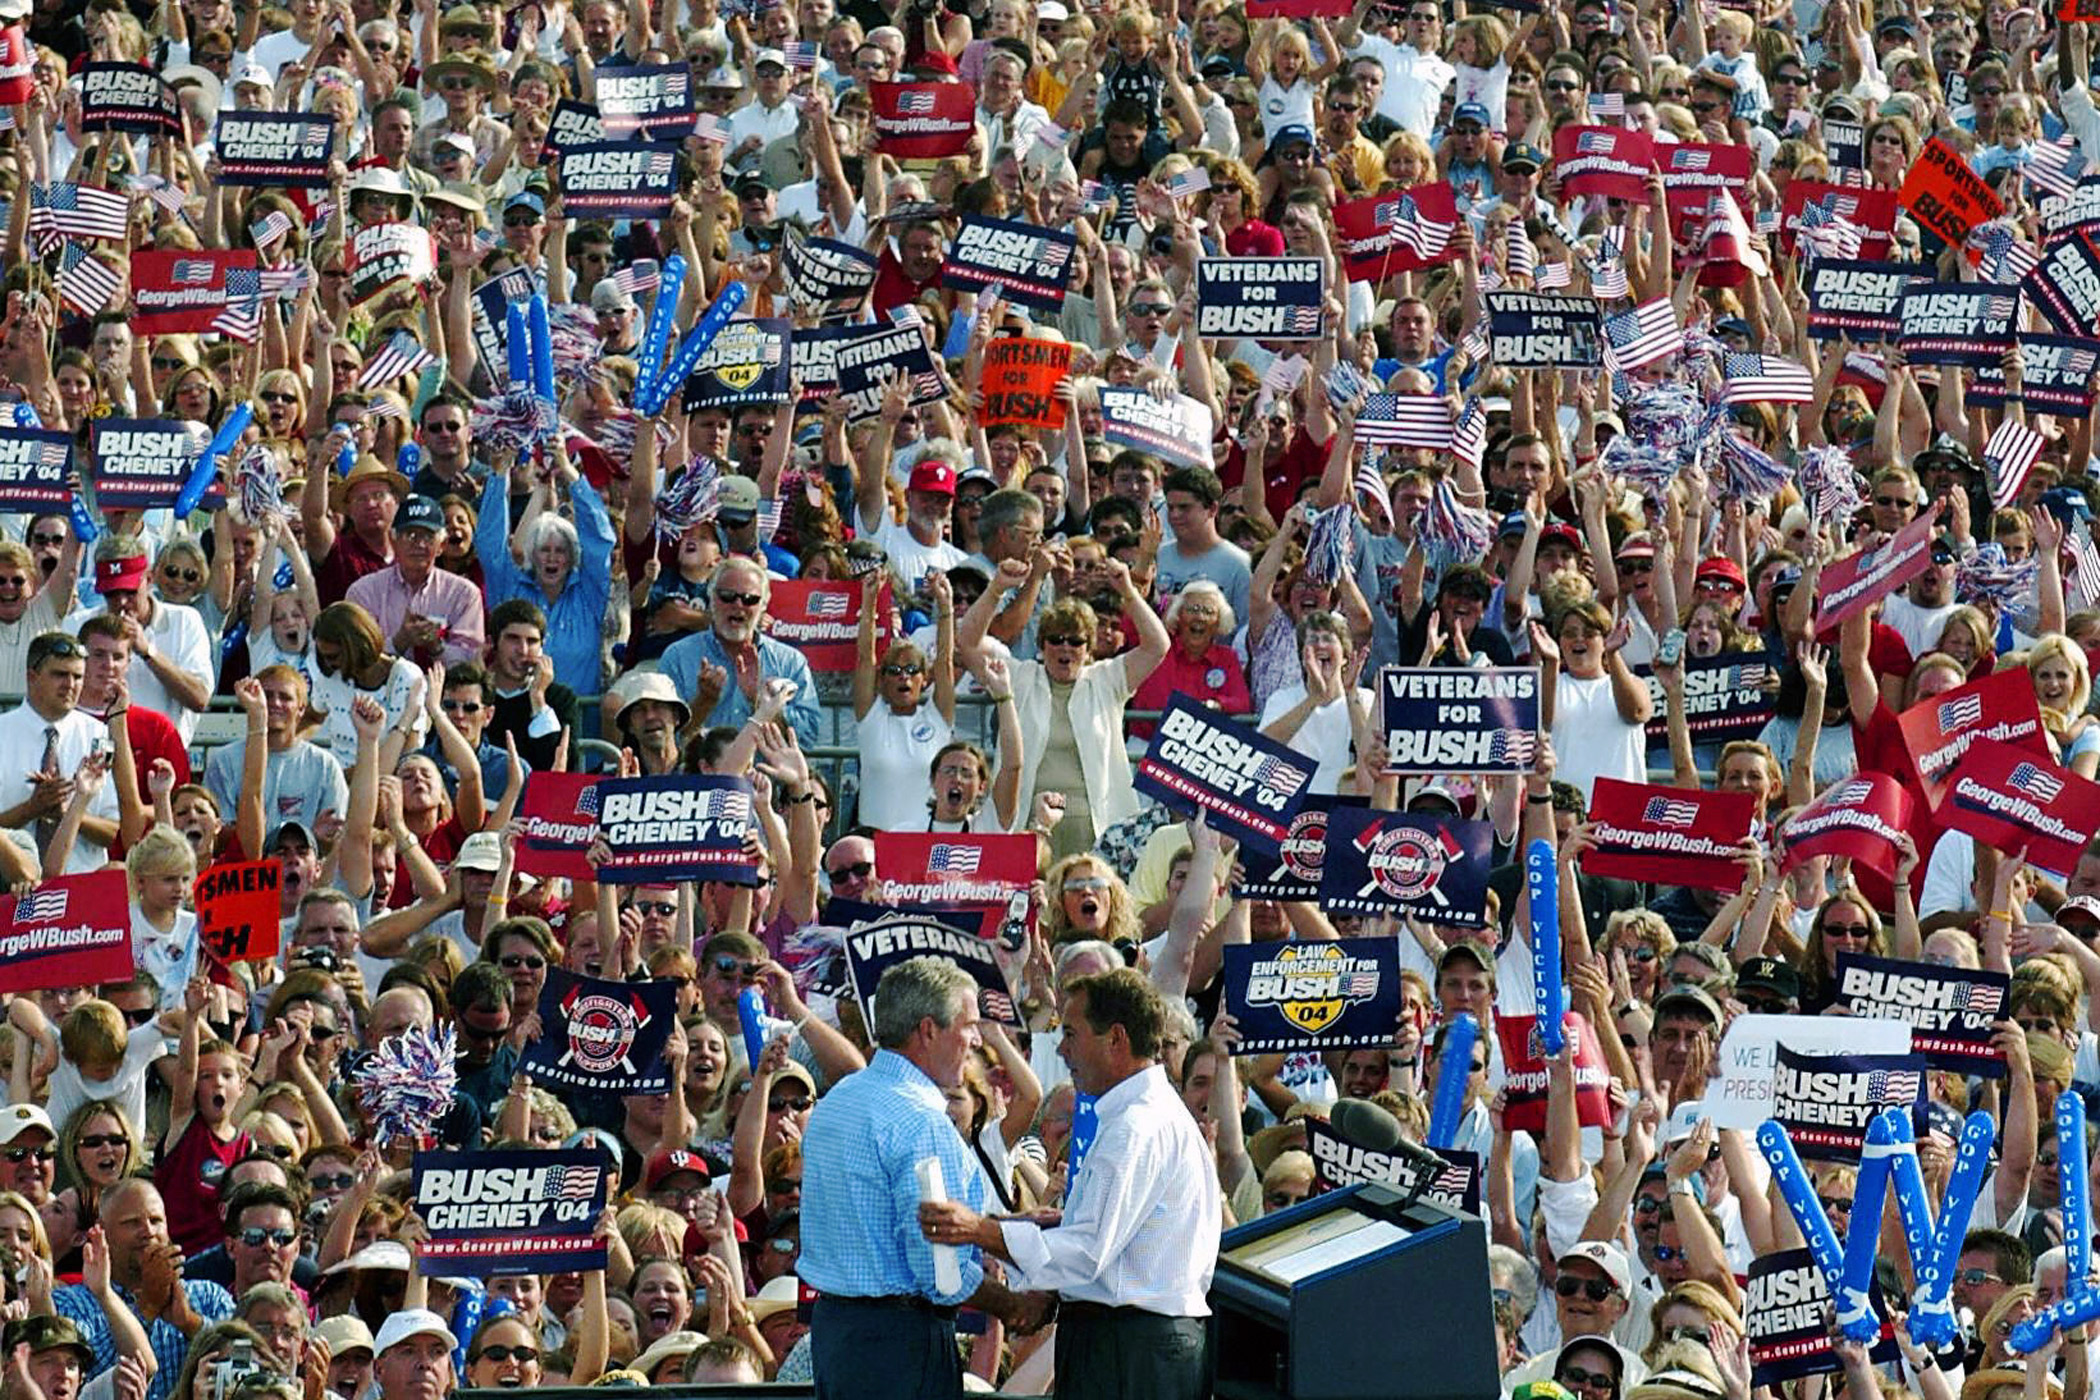 Boehner introduces George W. Bush during a rally in West Chester, Ohio, in 2004.